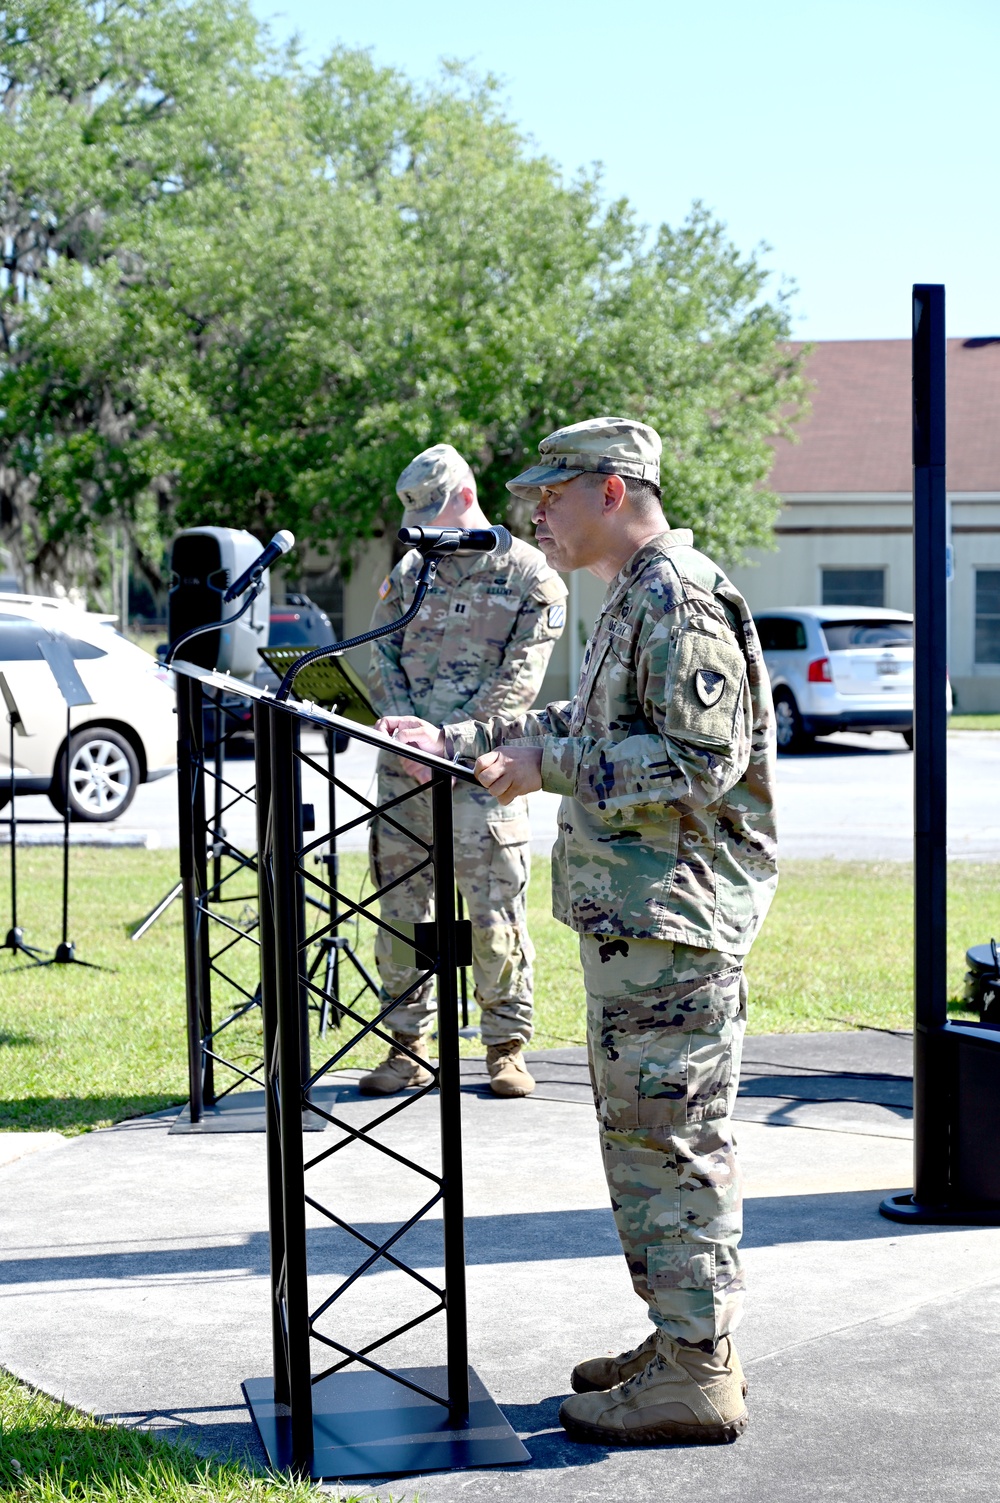 Hunter Army Airfield community gathers for National Day of Prayer observance